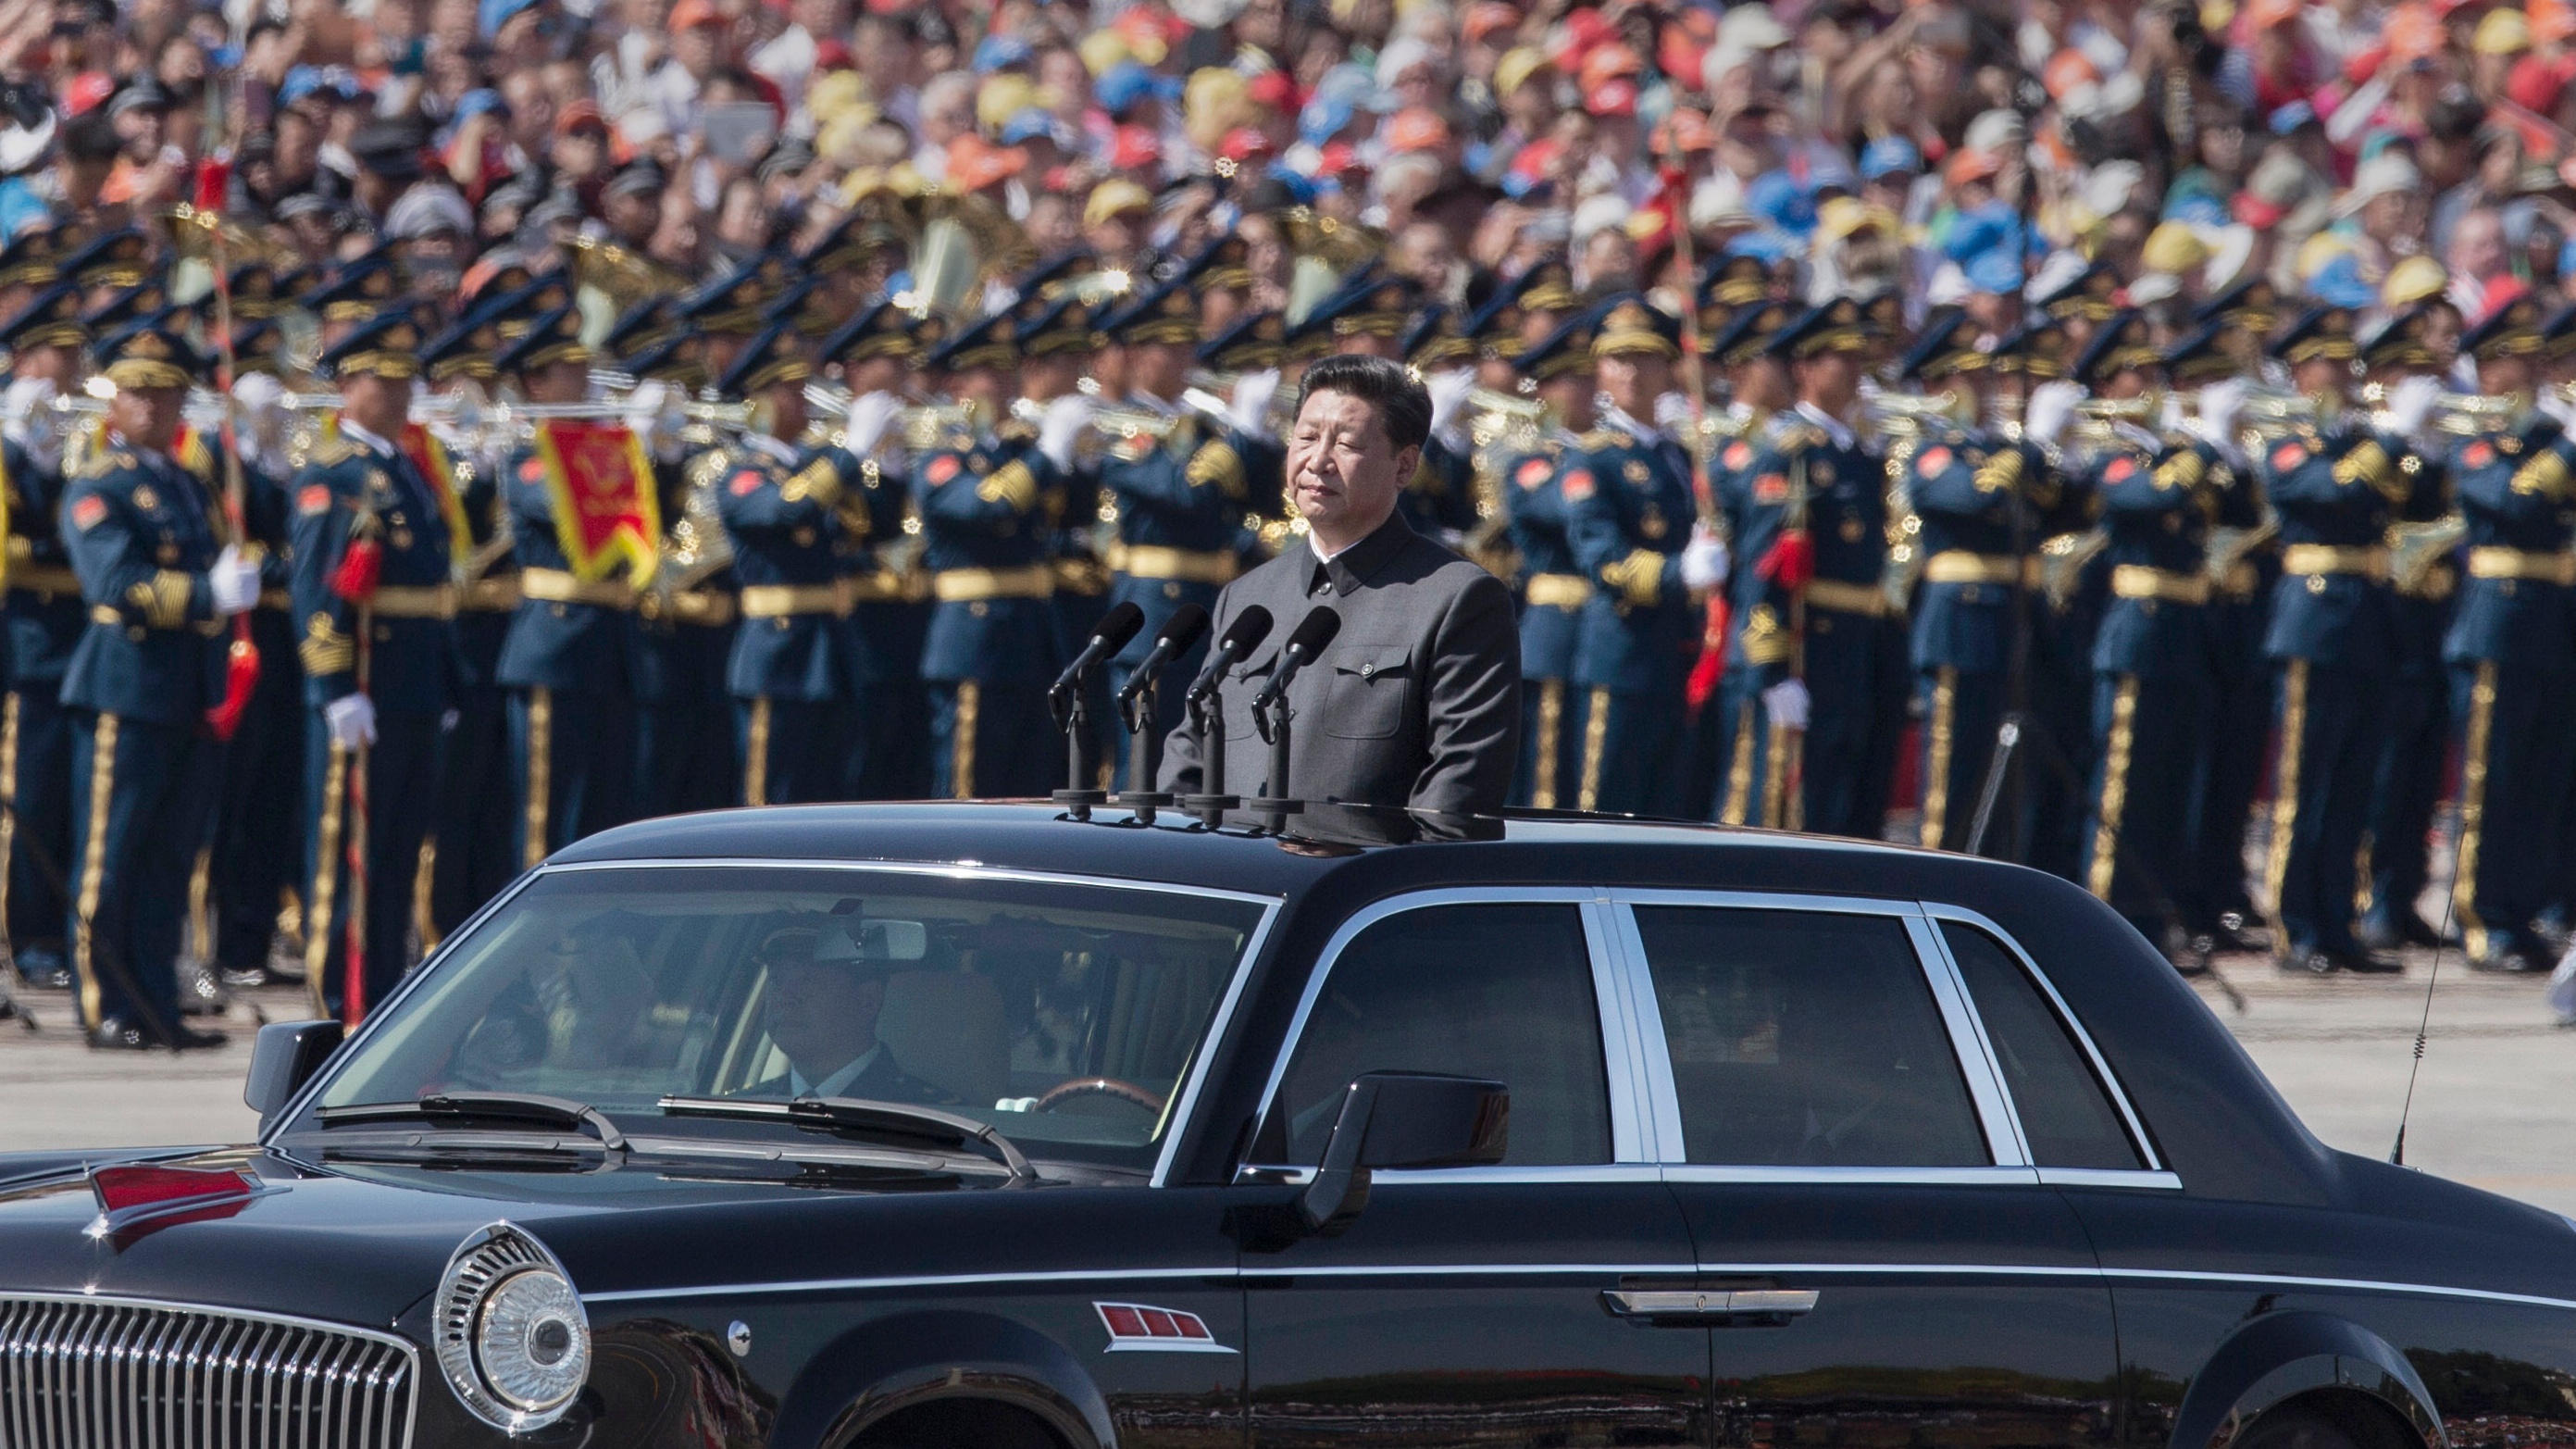 Xi Jinping during a 2015 military parade in Tiananmen Square